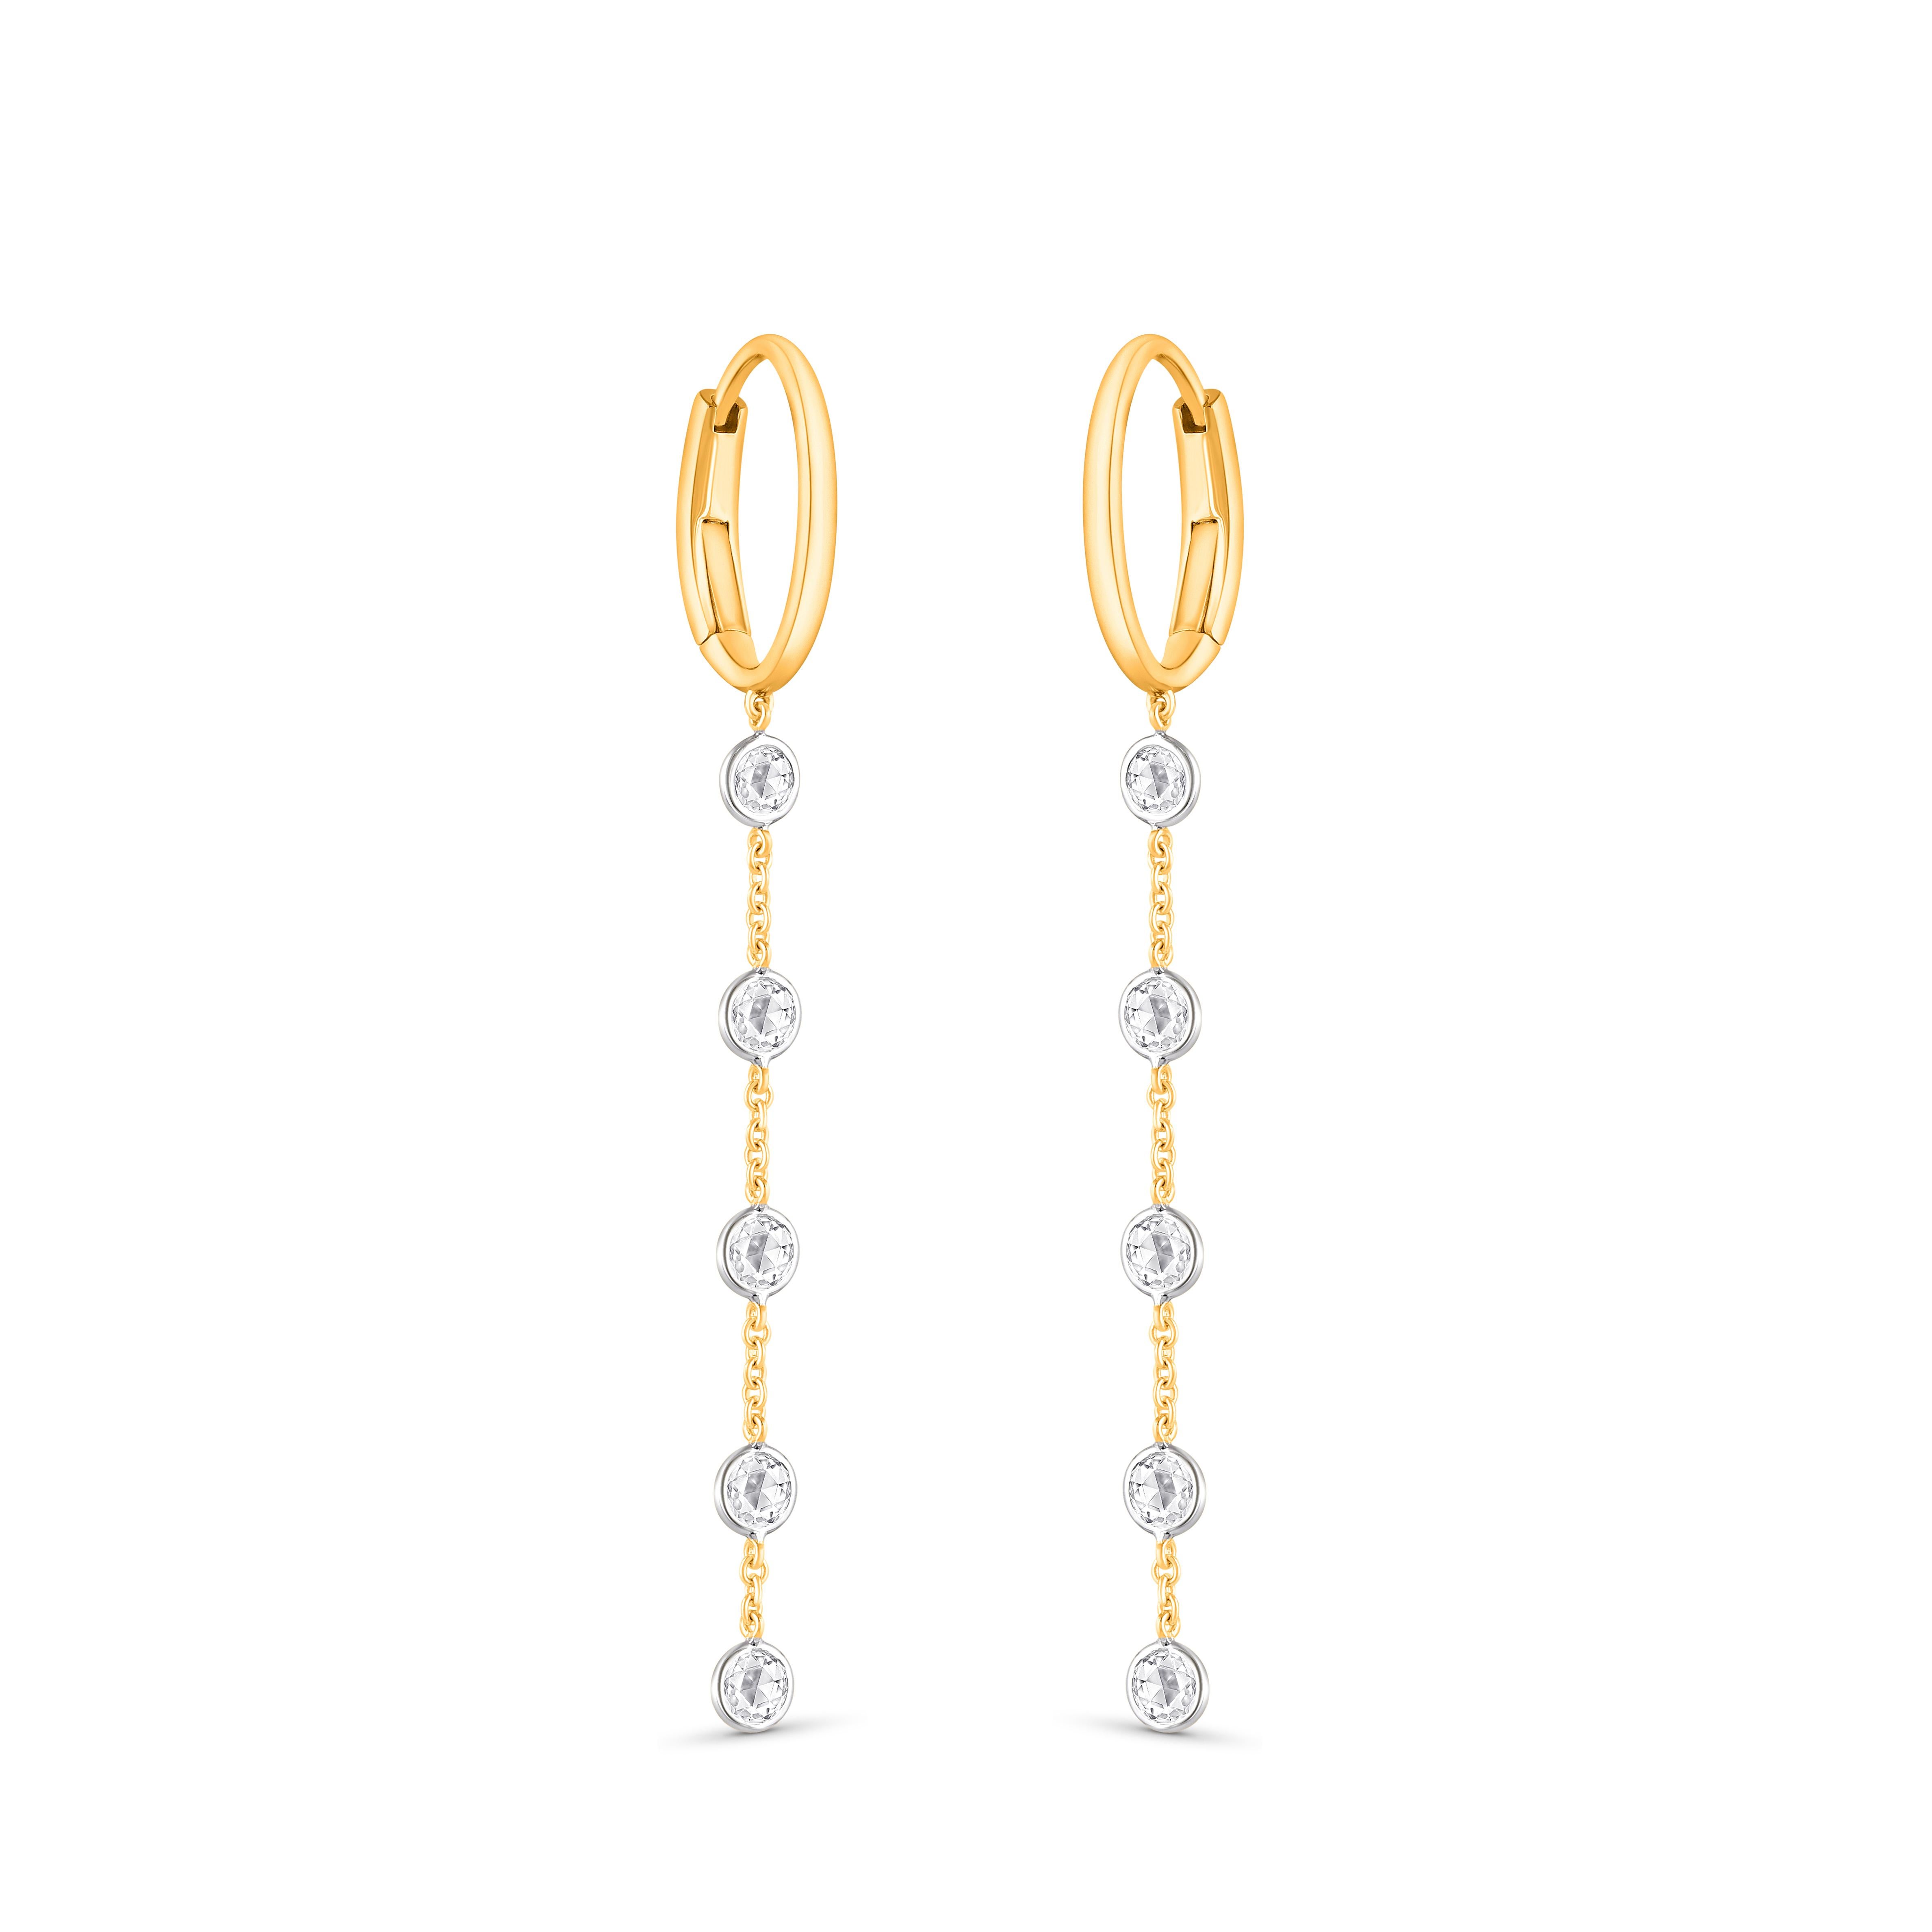 Inspired by the JOY of experiencing a gushing waterfall, these elegantly designed earrings  is studded with 1/2 carats natural rose cut diamonds in a prong setting and beautifully crafted in 18 KT Yellow gold. Our diamonds are graded as F color and